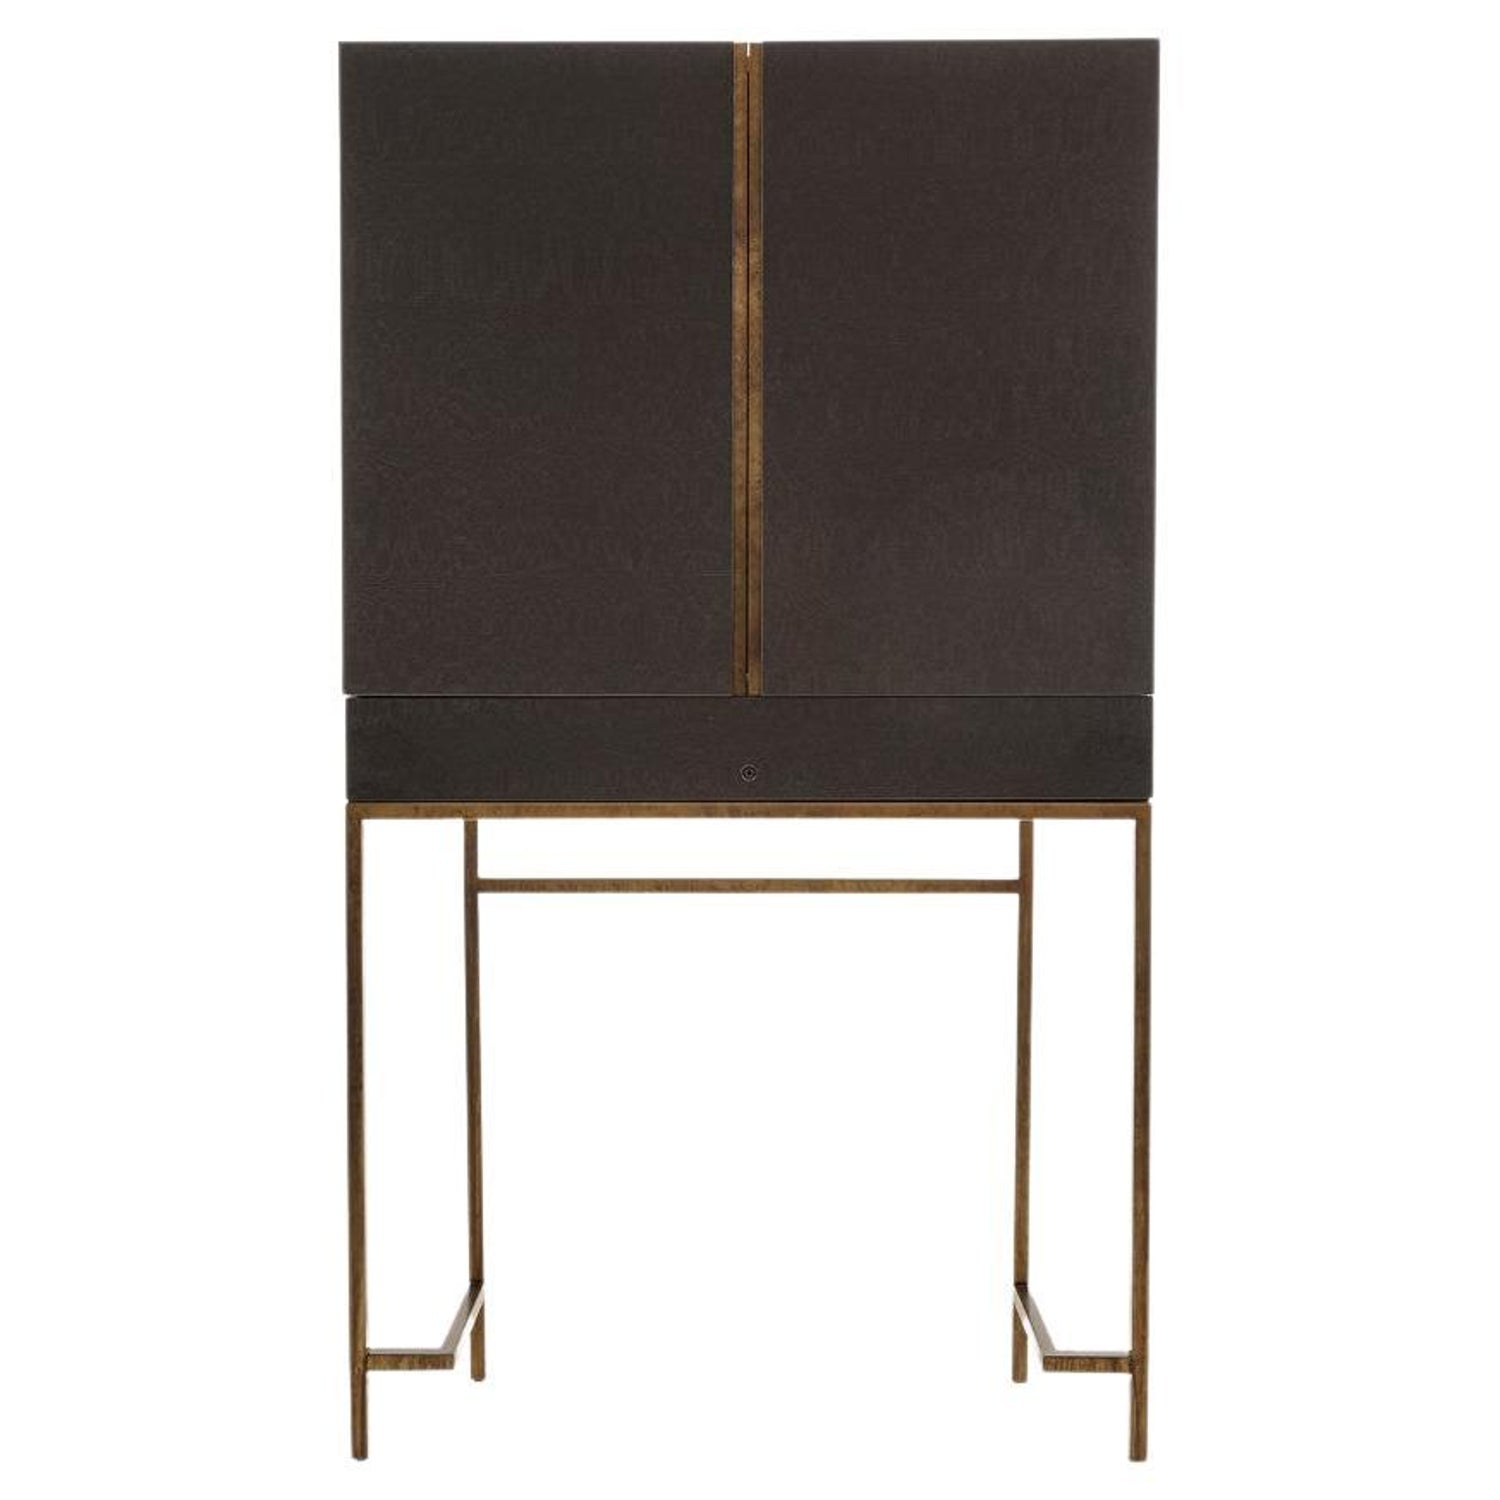 Eos Cabinet by Marmi Serafini For Sale at 1stDibs